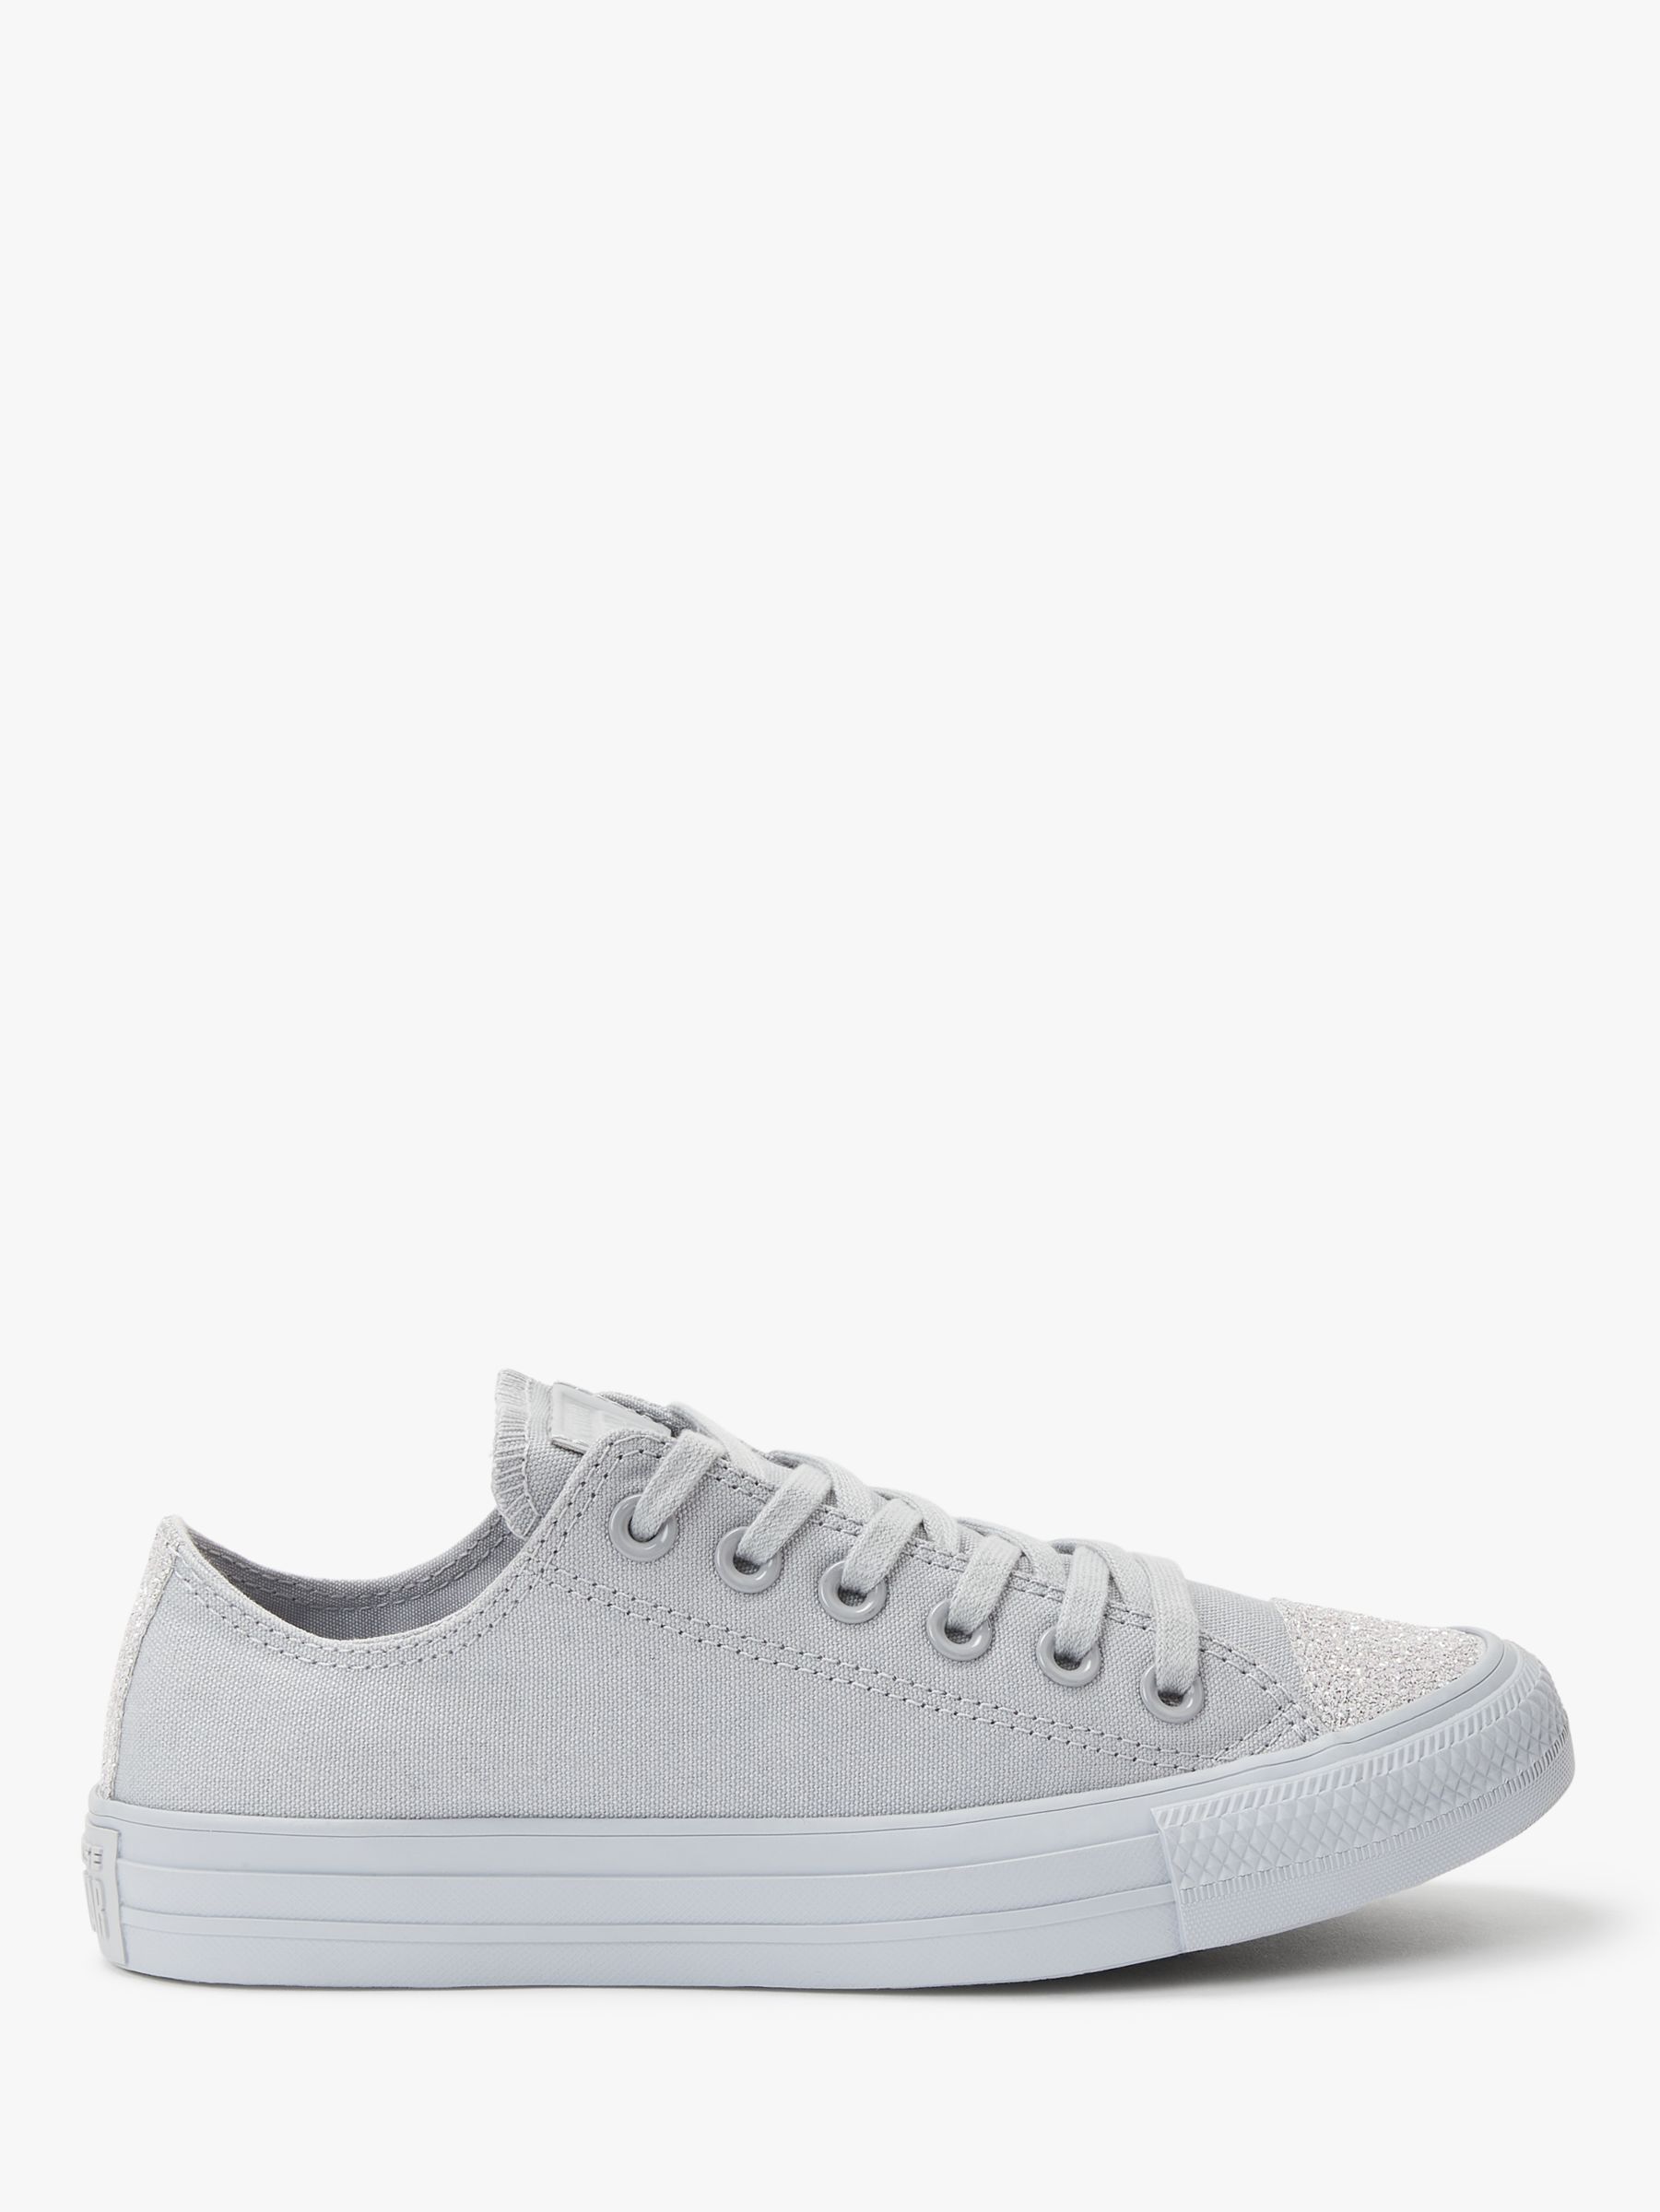 women's silver converse trainers